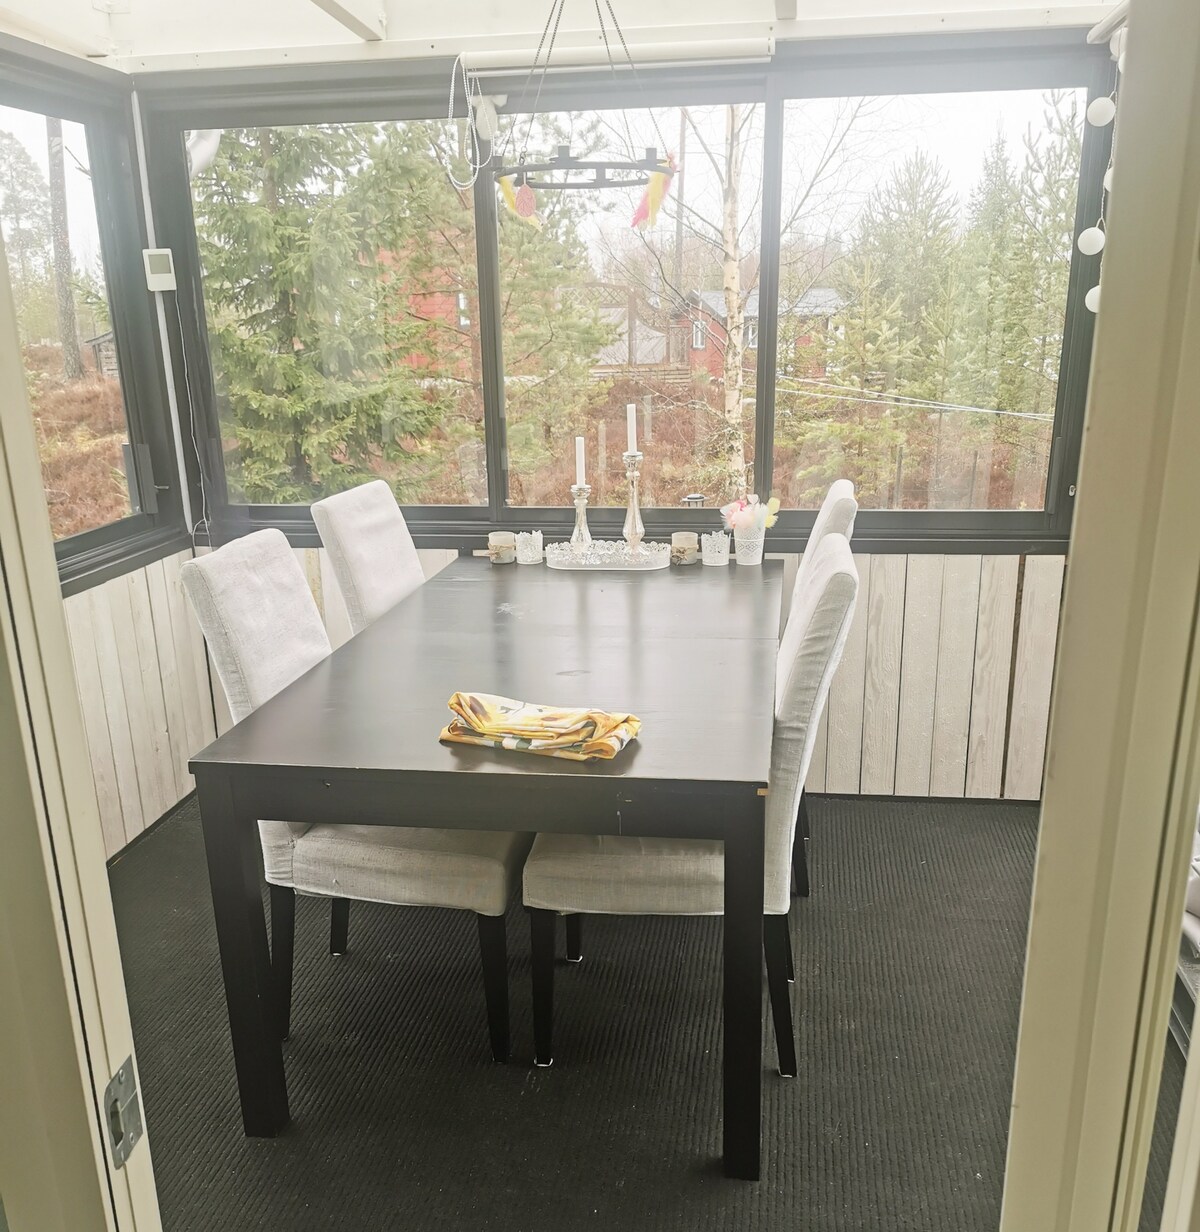 Holiday home in Axmar, Gävle with 10 beds | Se2000